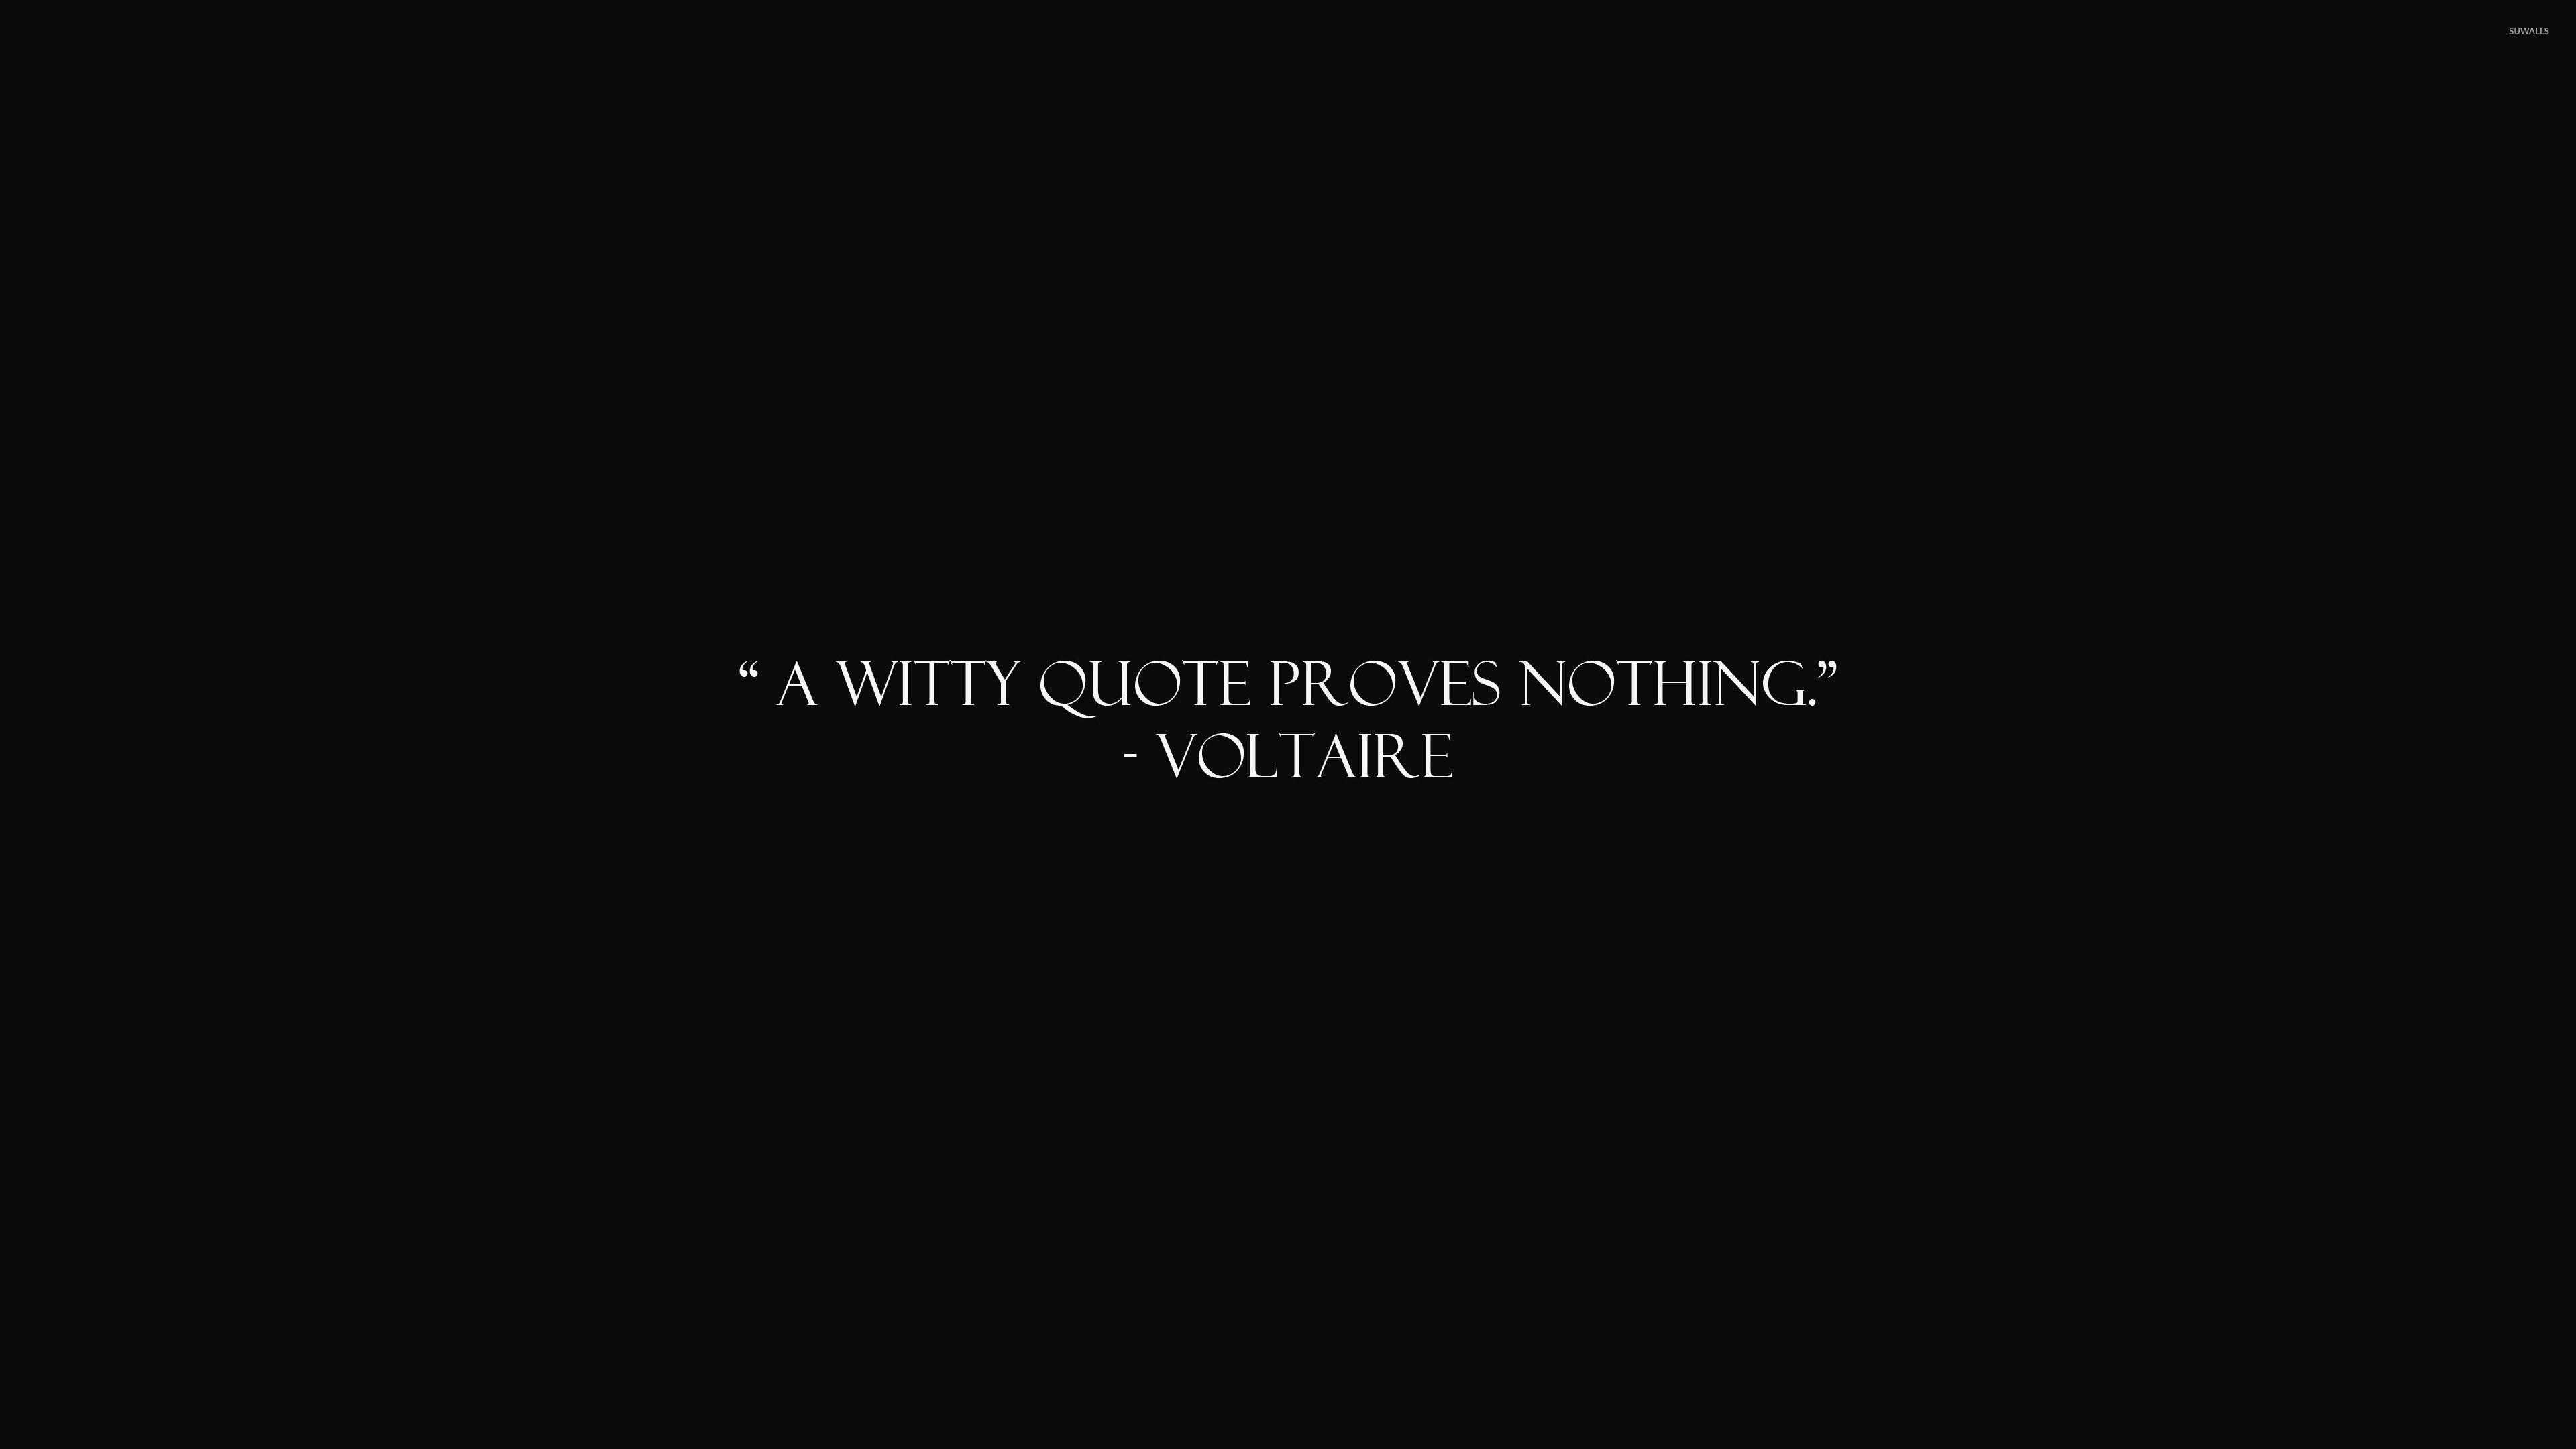 A witty quote proves nothing wallpaper wallpaper